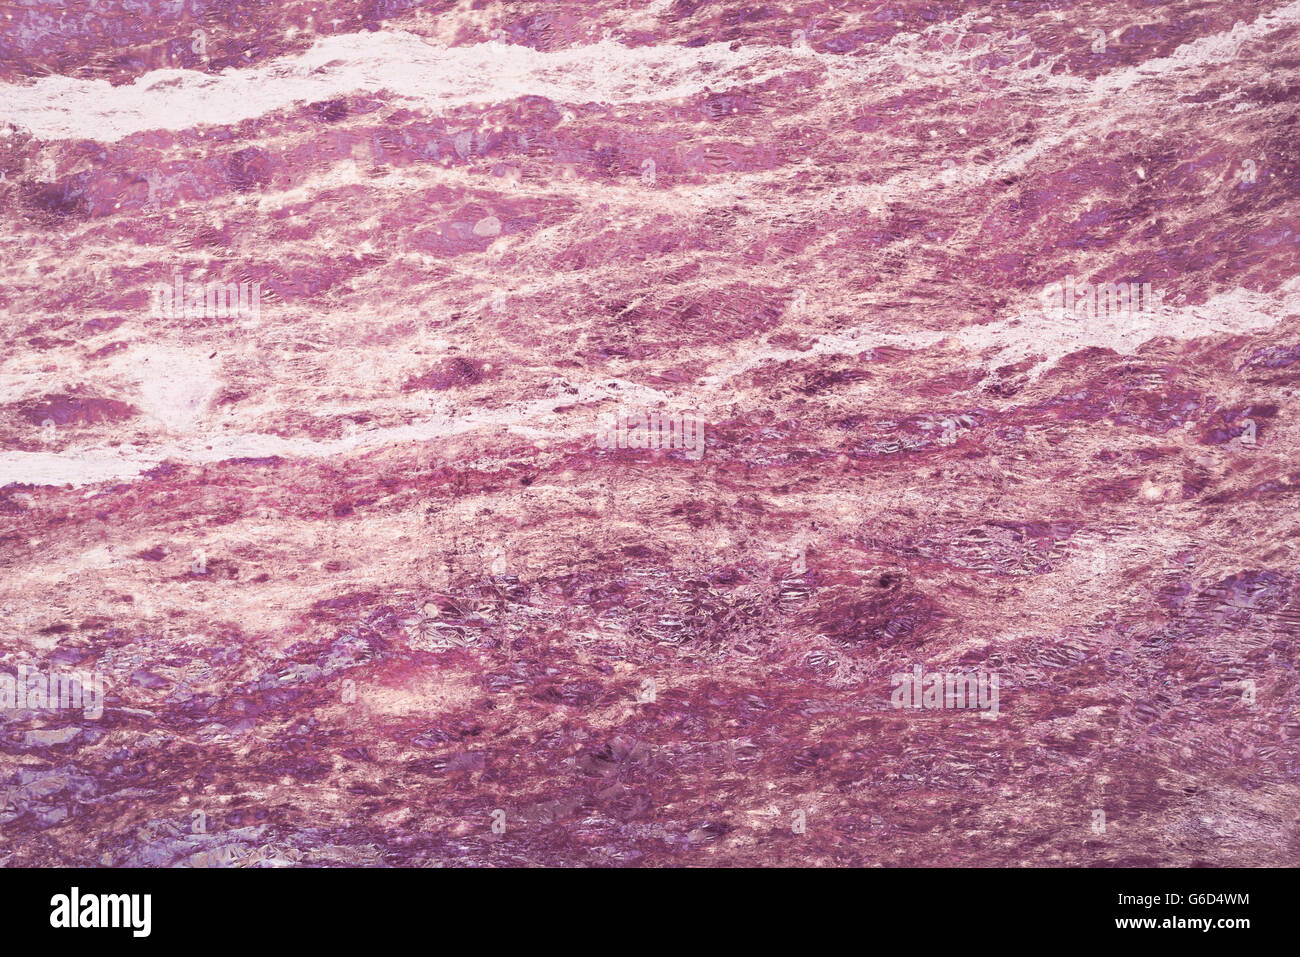 Abstract grunge texture background in purple color, vintage style stone surface backdrop. Stock Photo